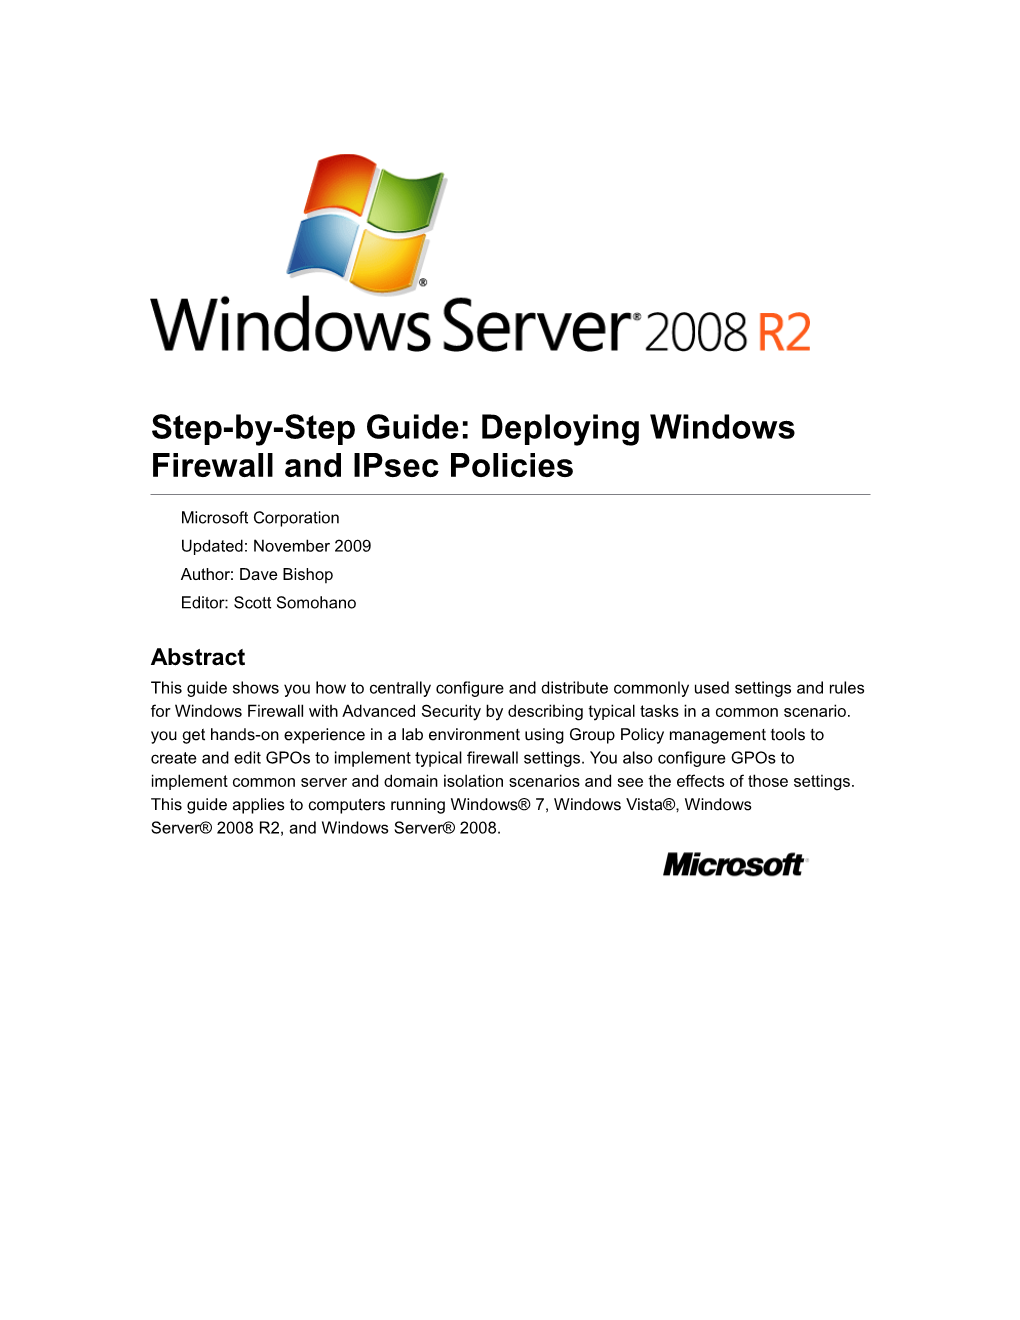 Step-By-Step Guide: Deploying Windows Firewall and Ipsec Policies